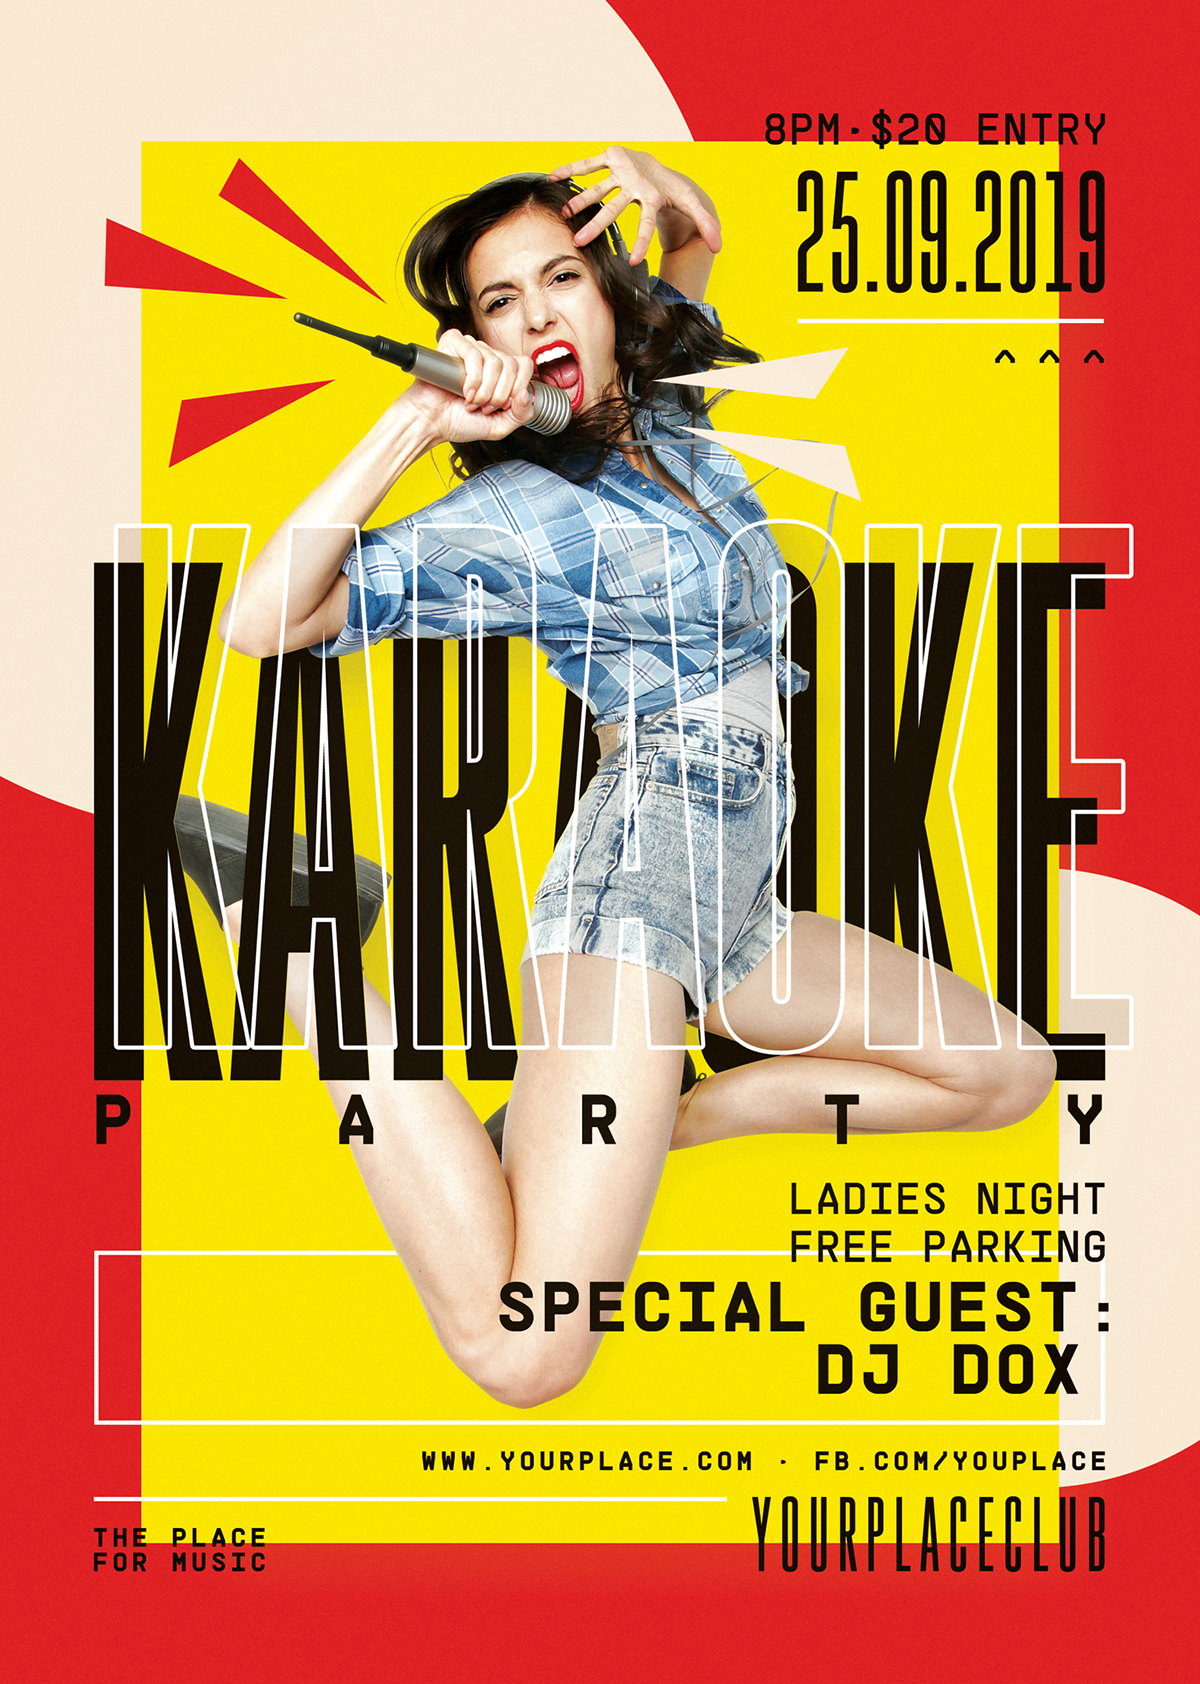 karaoke party Singing flyer poster a4 template psd modern Colourful 